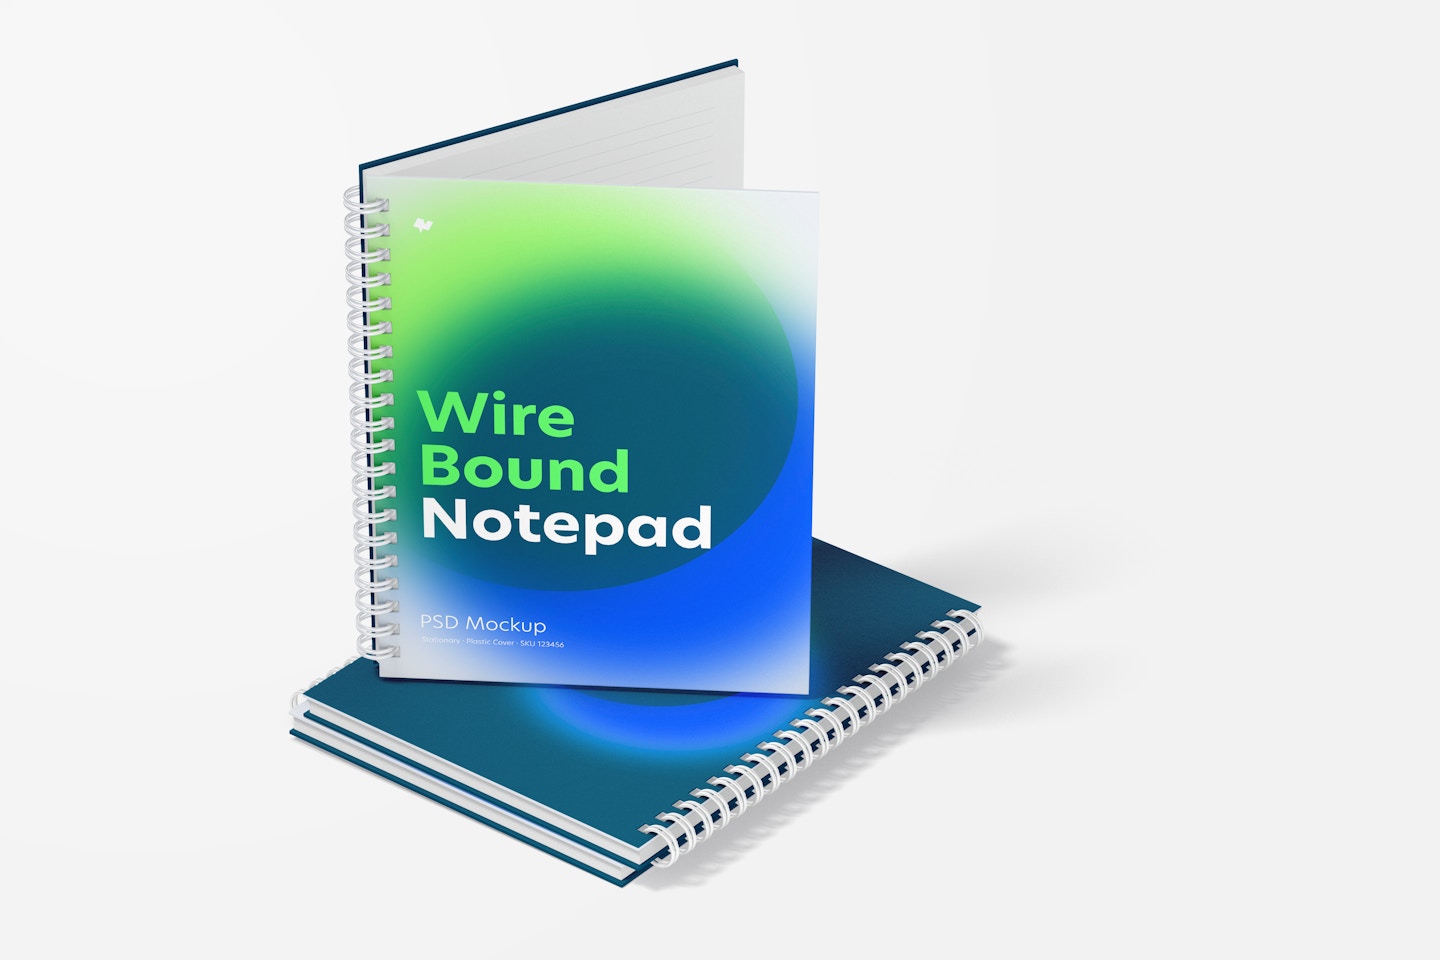 Plastic Cover Wire Bound Notepads Mockup, Opened and Closed